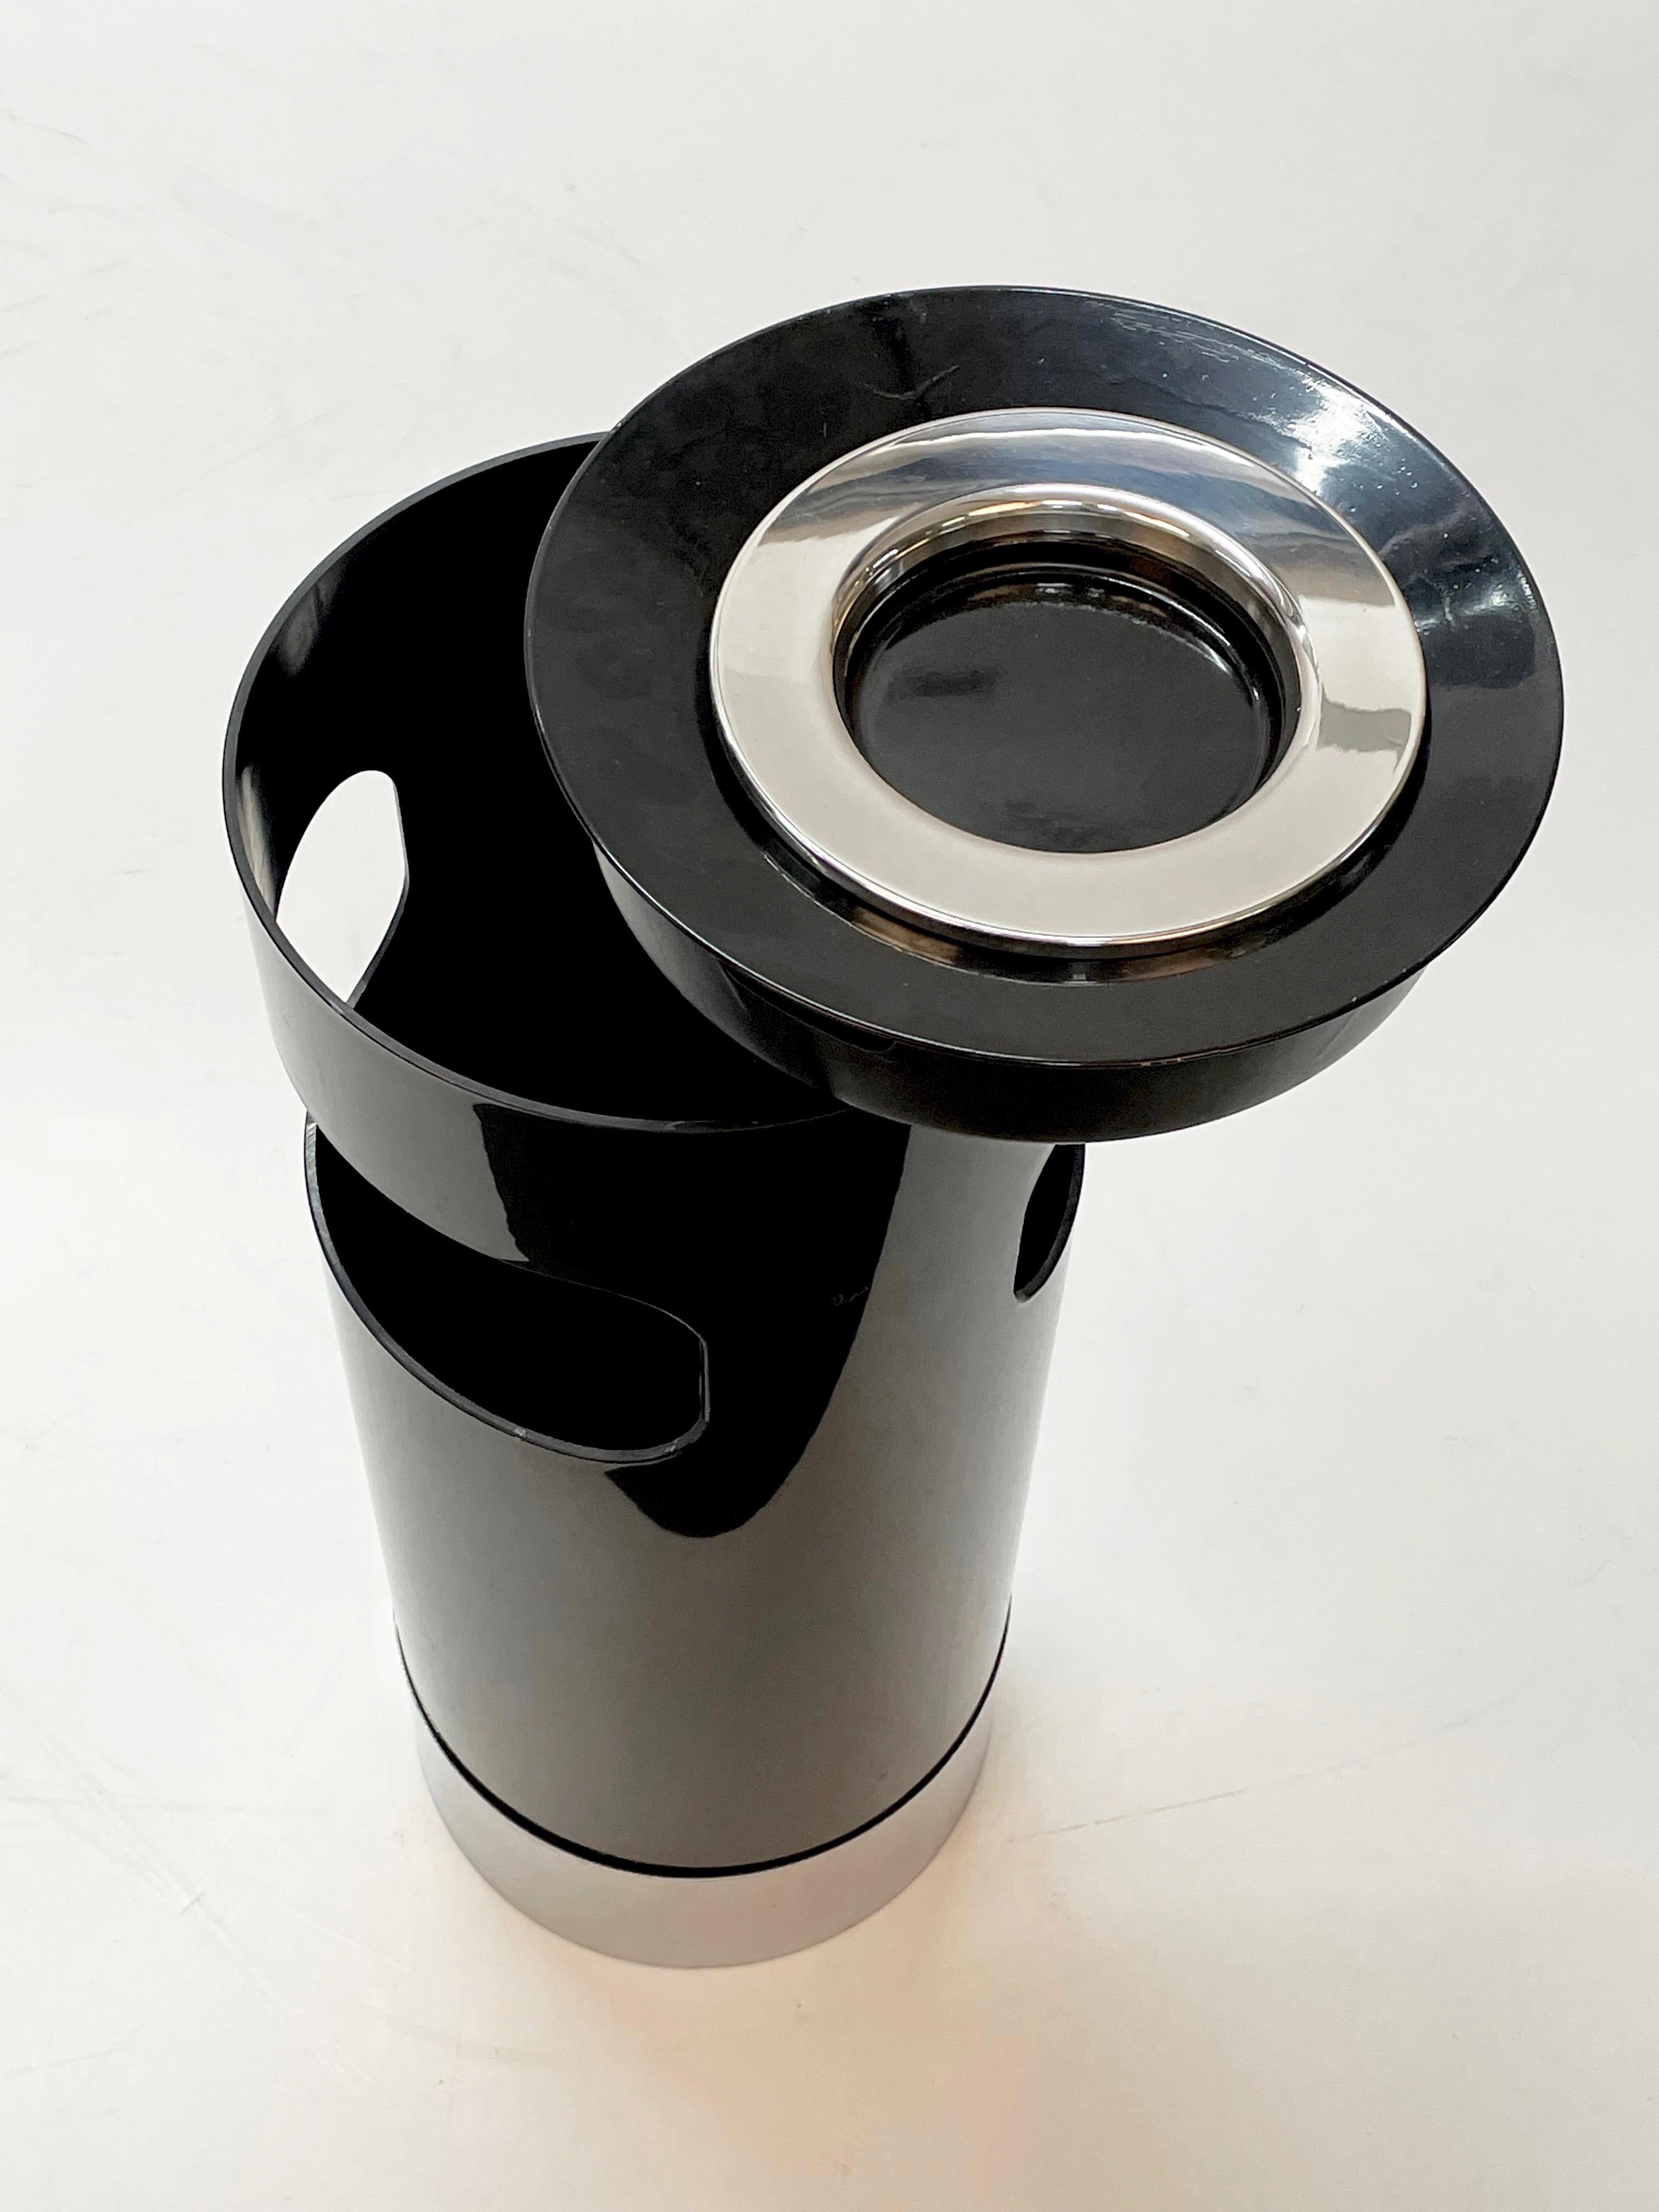 Gino Colombini Midcentury Black Umbrella Stands or Ashtray for Kartell, 1970 For Sale 11